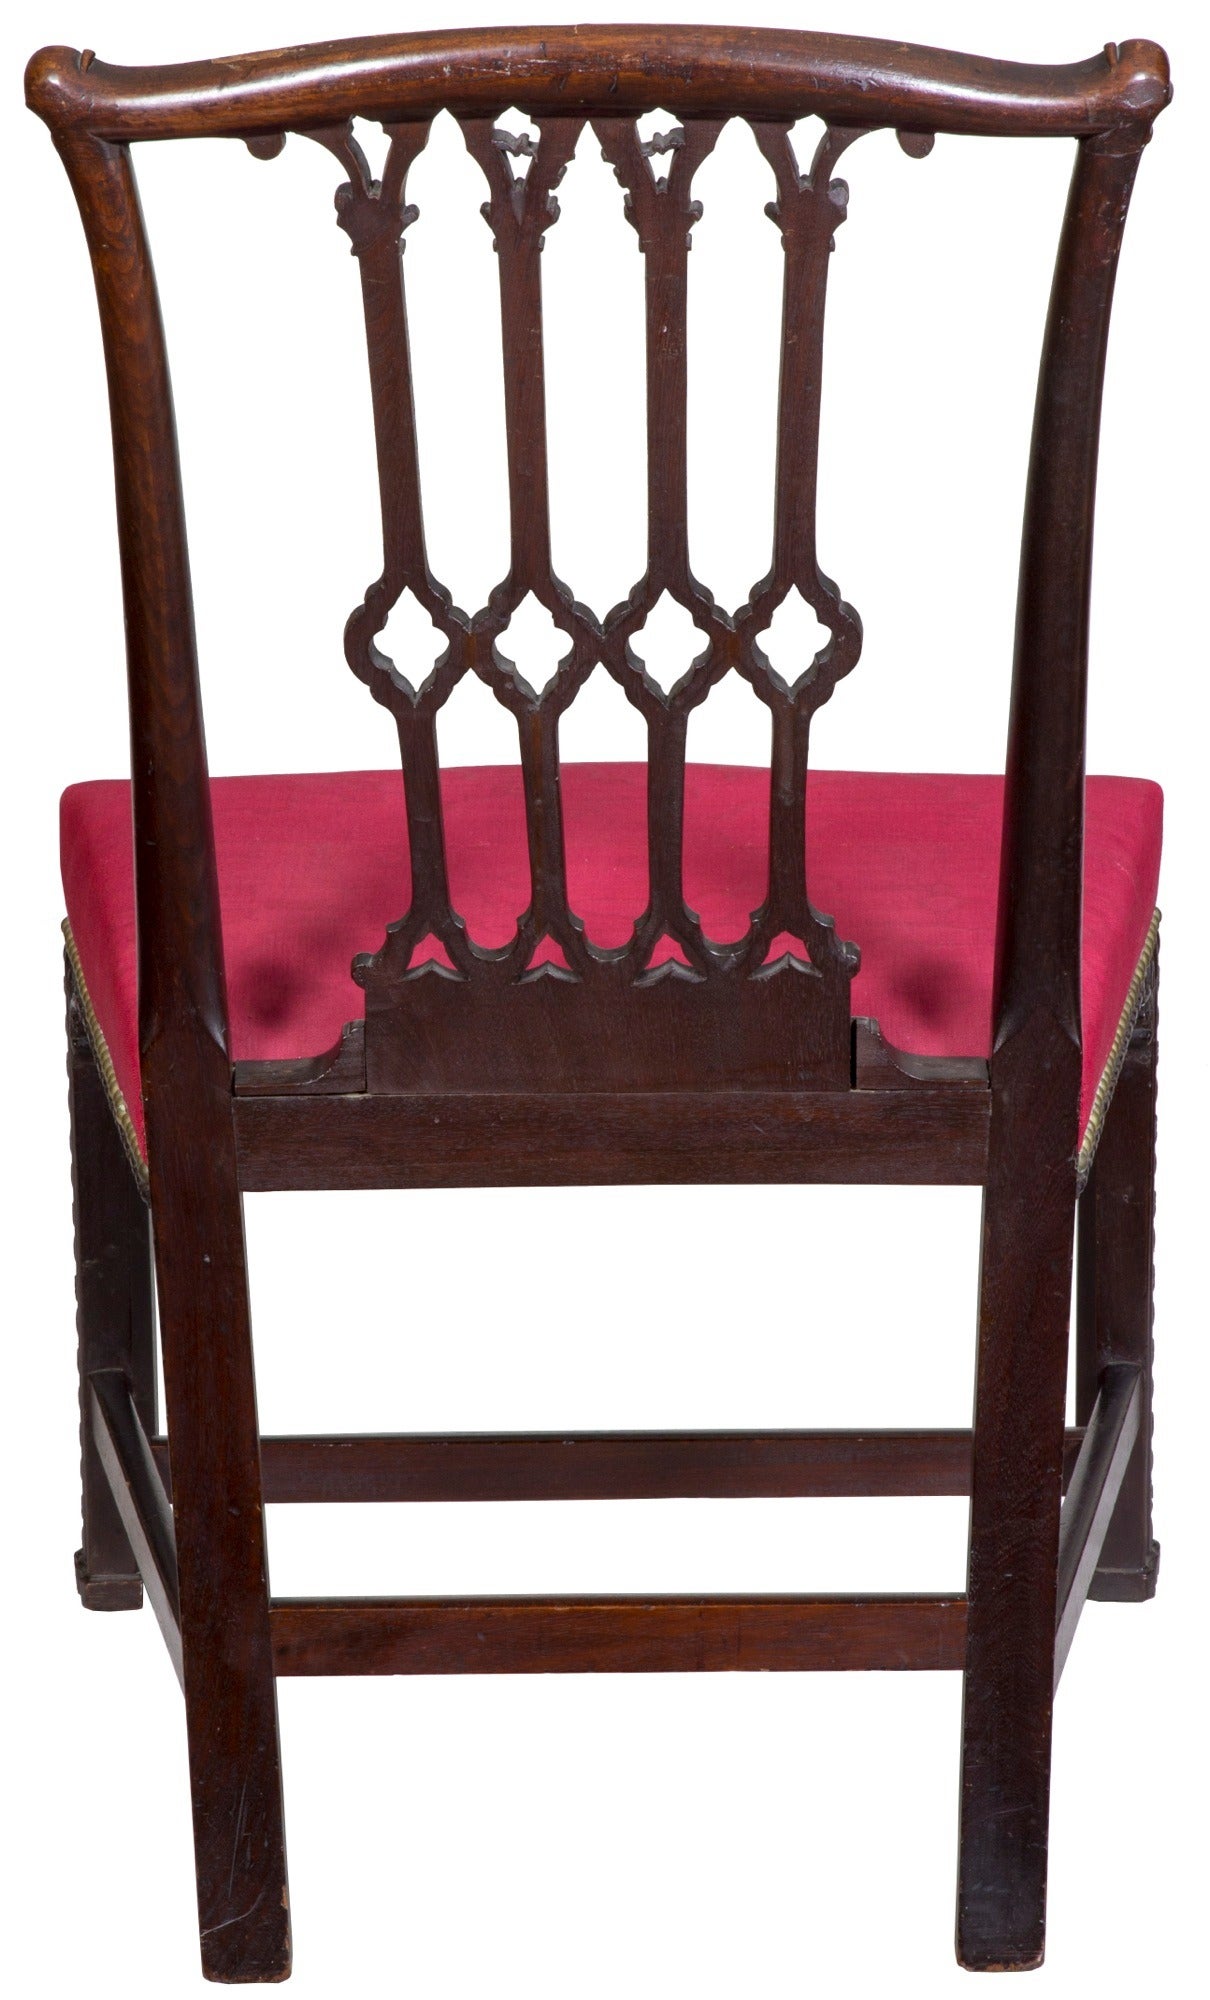 This is a chair of good size with bowed seat and superb carving throughout. It’s of good weight, of the best dark, heavy mahogany, which is fully carved. Note the carving on the front legs with the Marlboro cuffed feet. The stiles are fluted and the